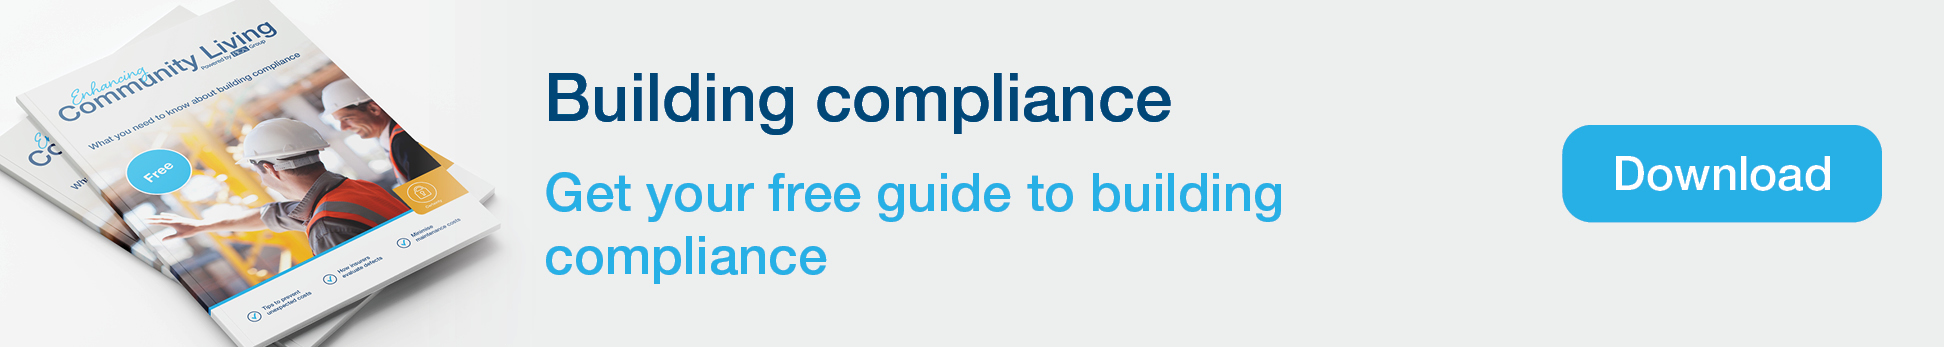 Guide to building compliance